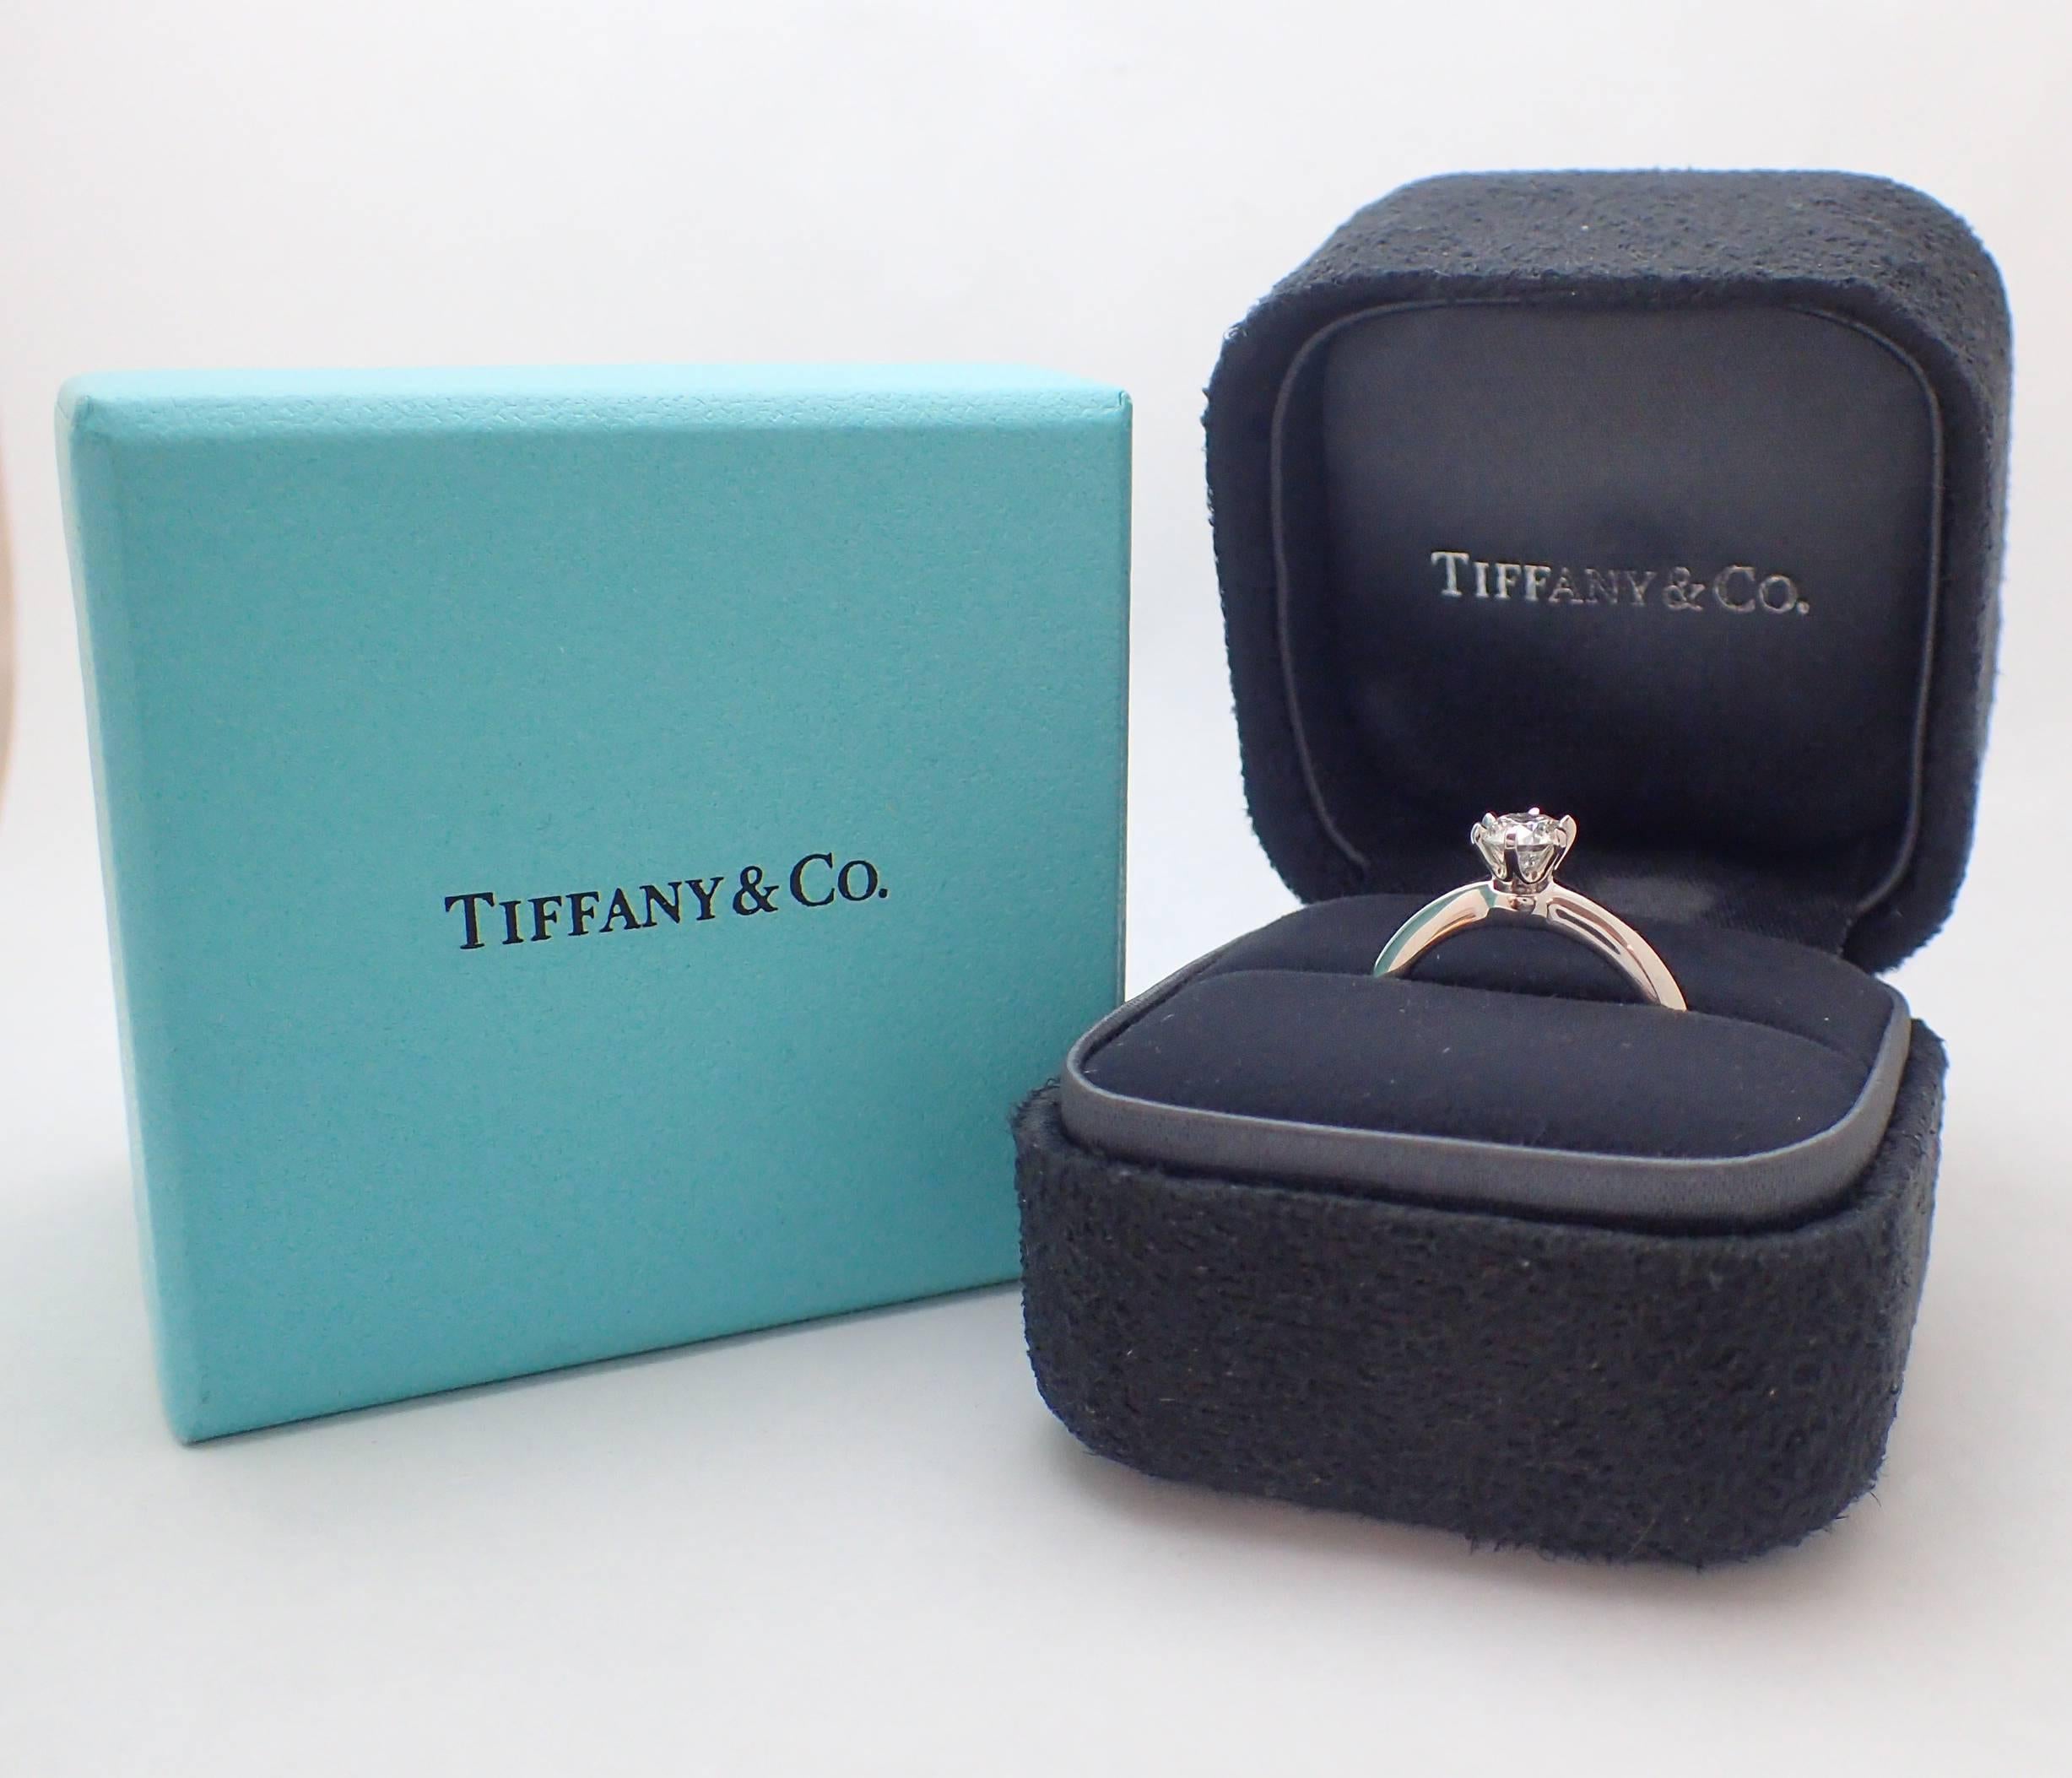 Women's or Men's 0.57 Carat Tiffany & Co. Solitaire Diamond Engagement Ring